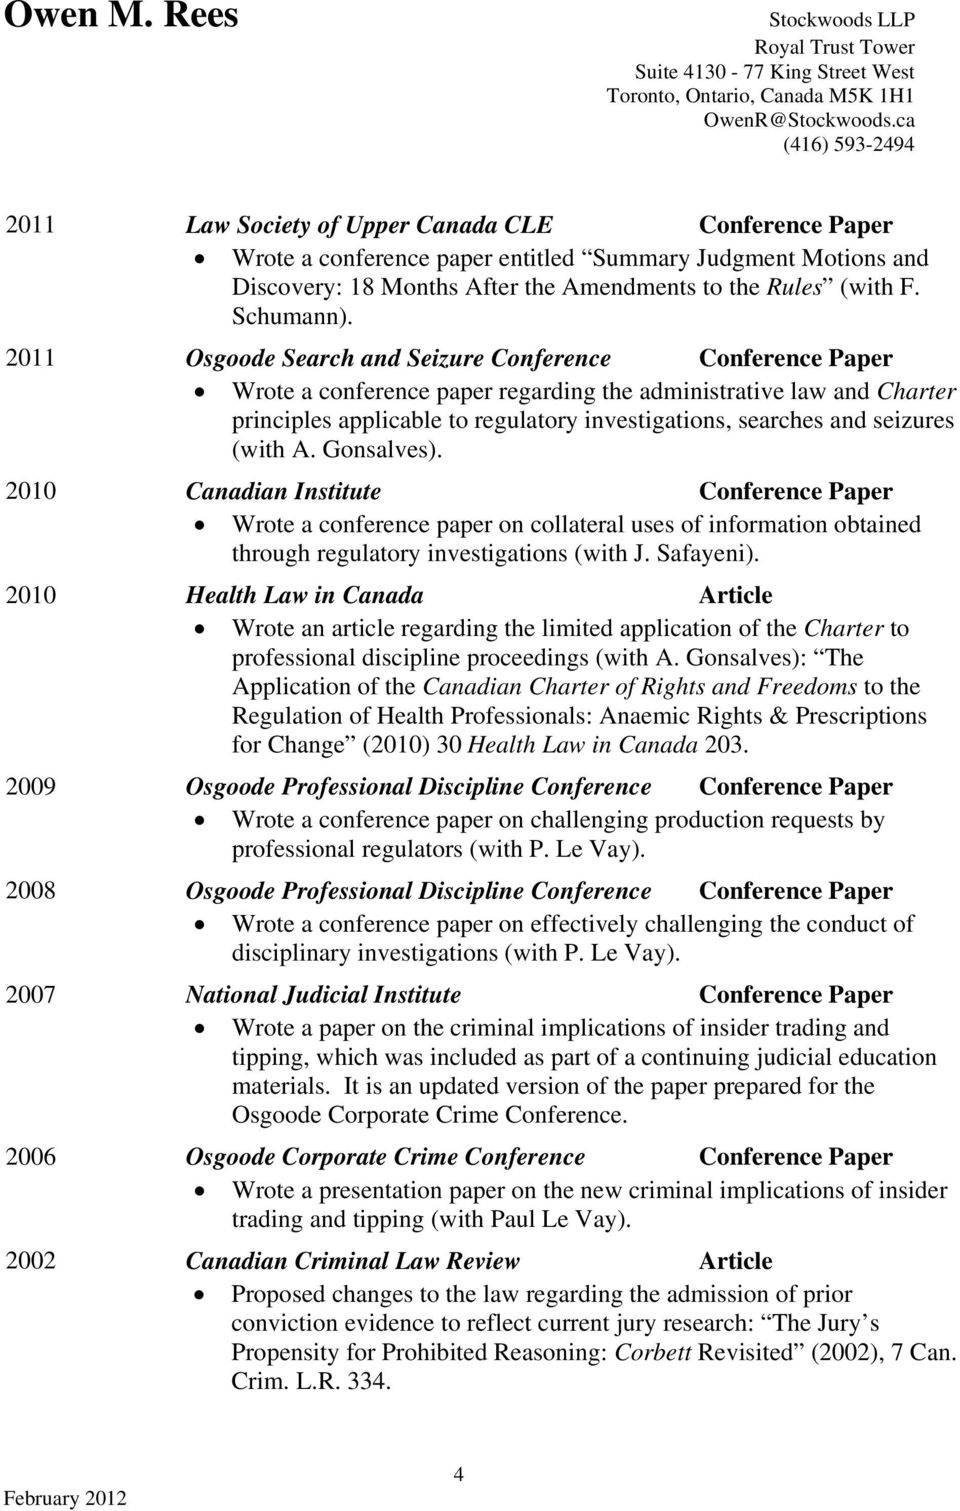 seizures (with A. Gonsalves). 2010 Canadian Institute Conference Paper Wrote a conference paper on collateral uses of information obtained through regulatory investigations (with J. Safayeni).